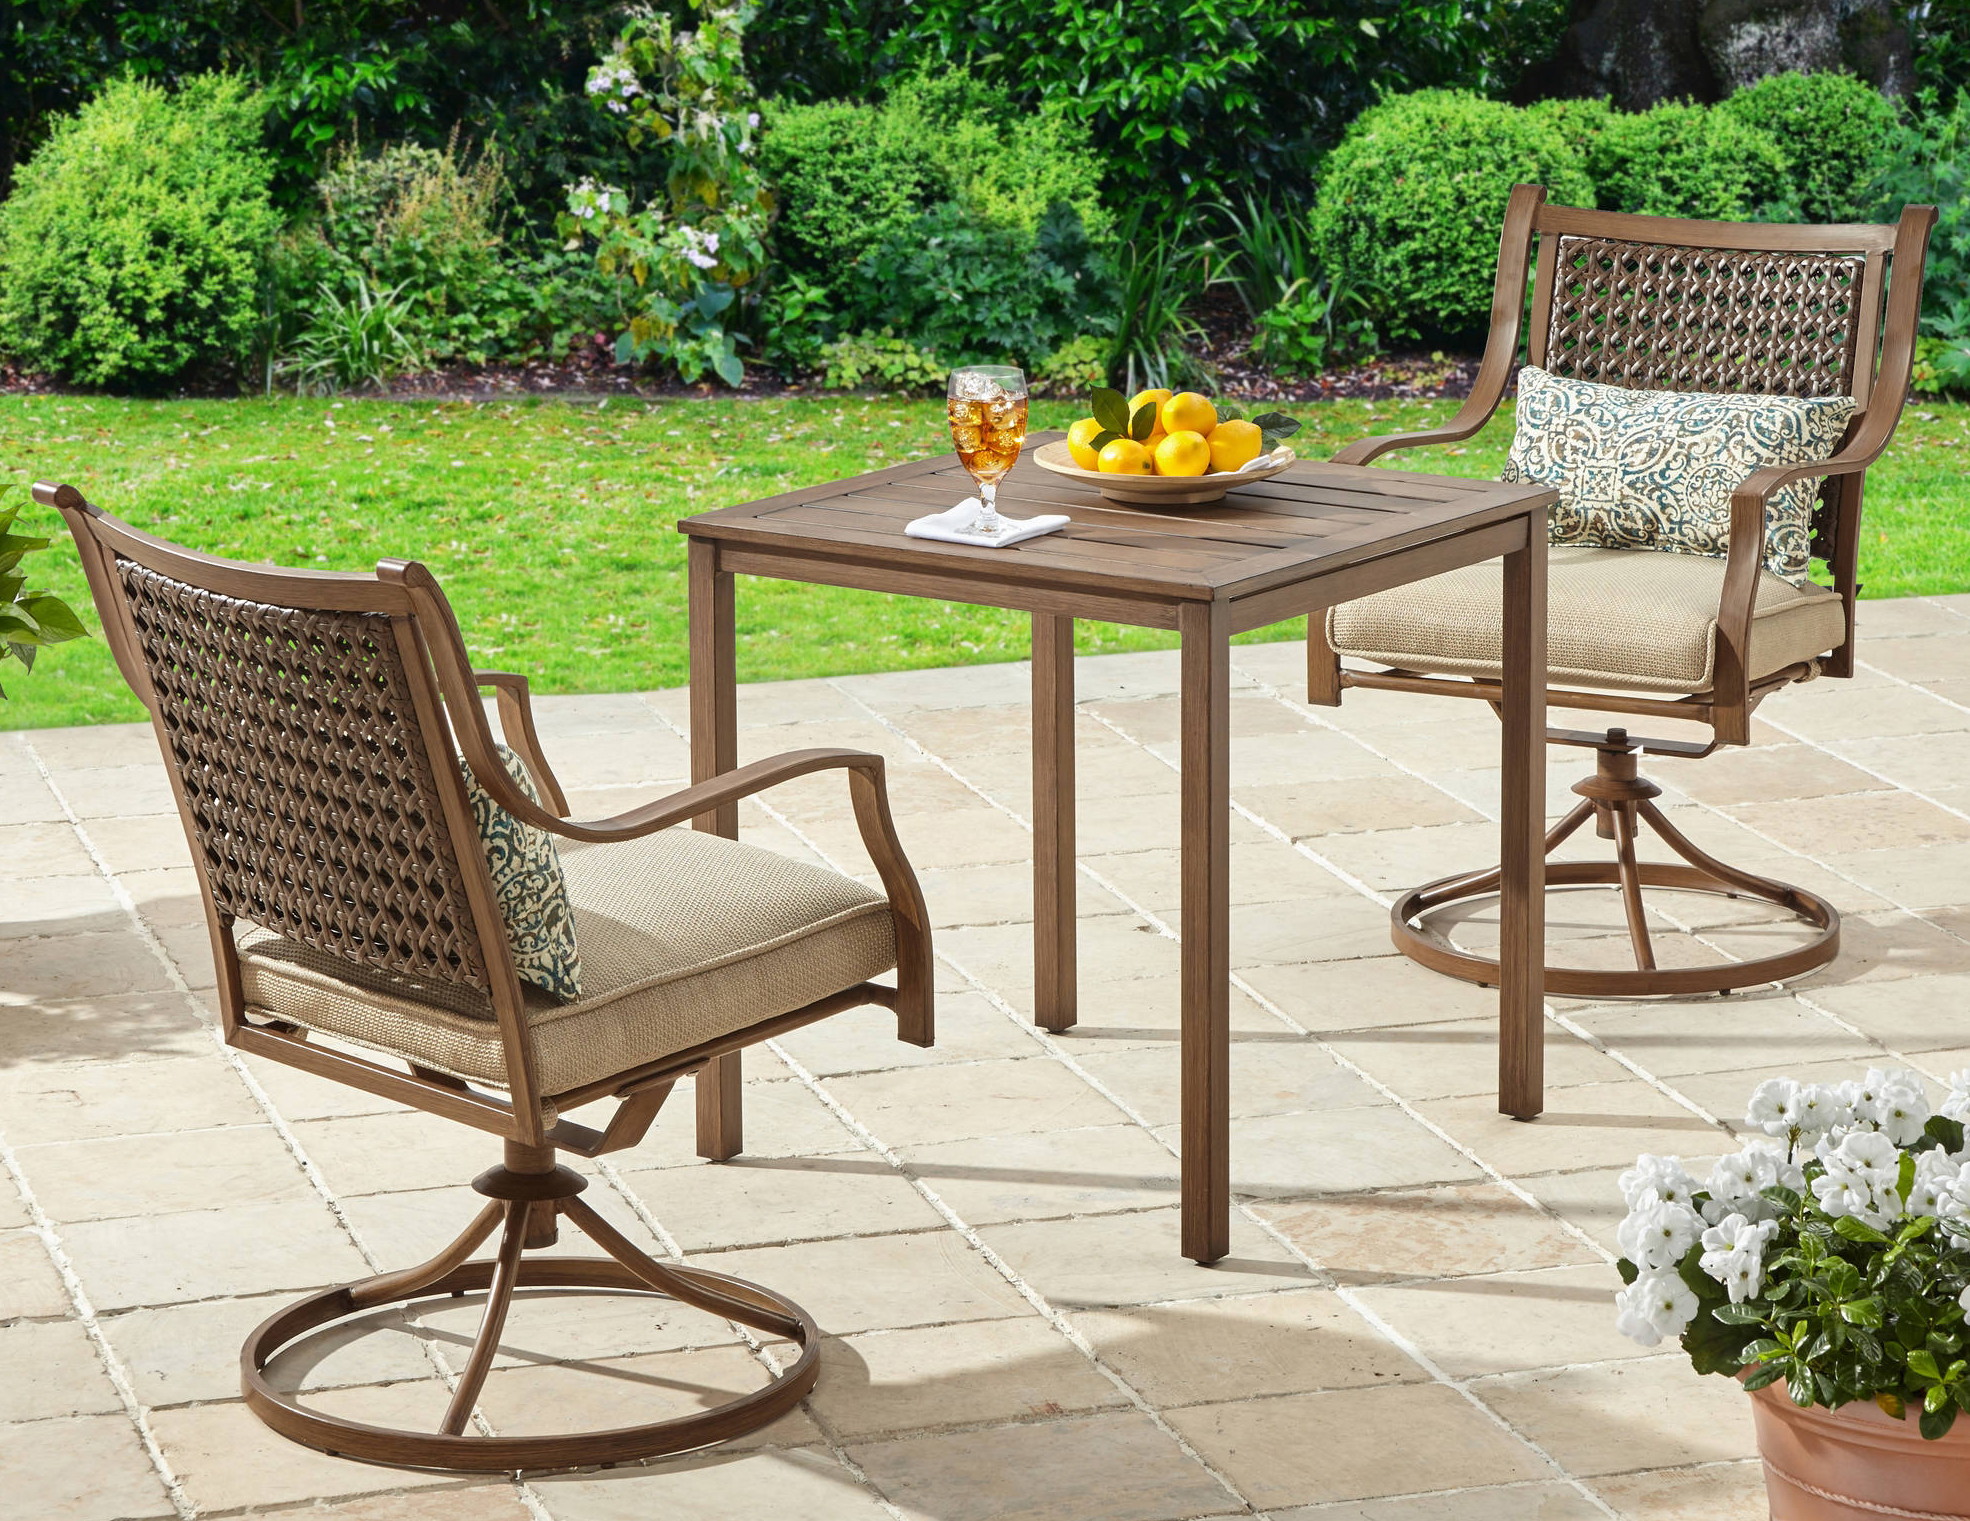 www.bagssaleusa.com Outdoor Furniture Clearance - Patio Sets, as Low as $49! - The Krazy Coupon Lady